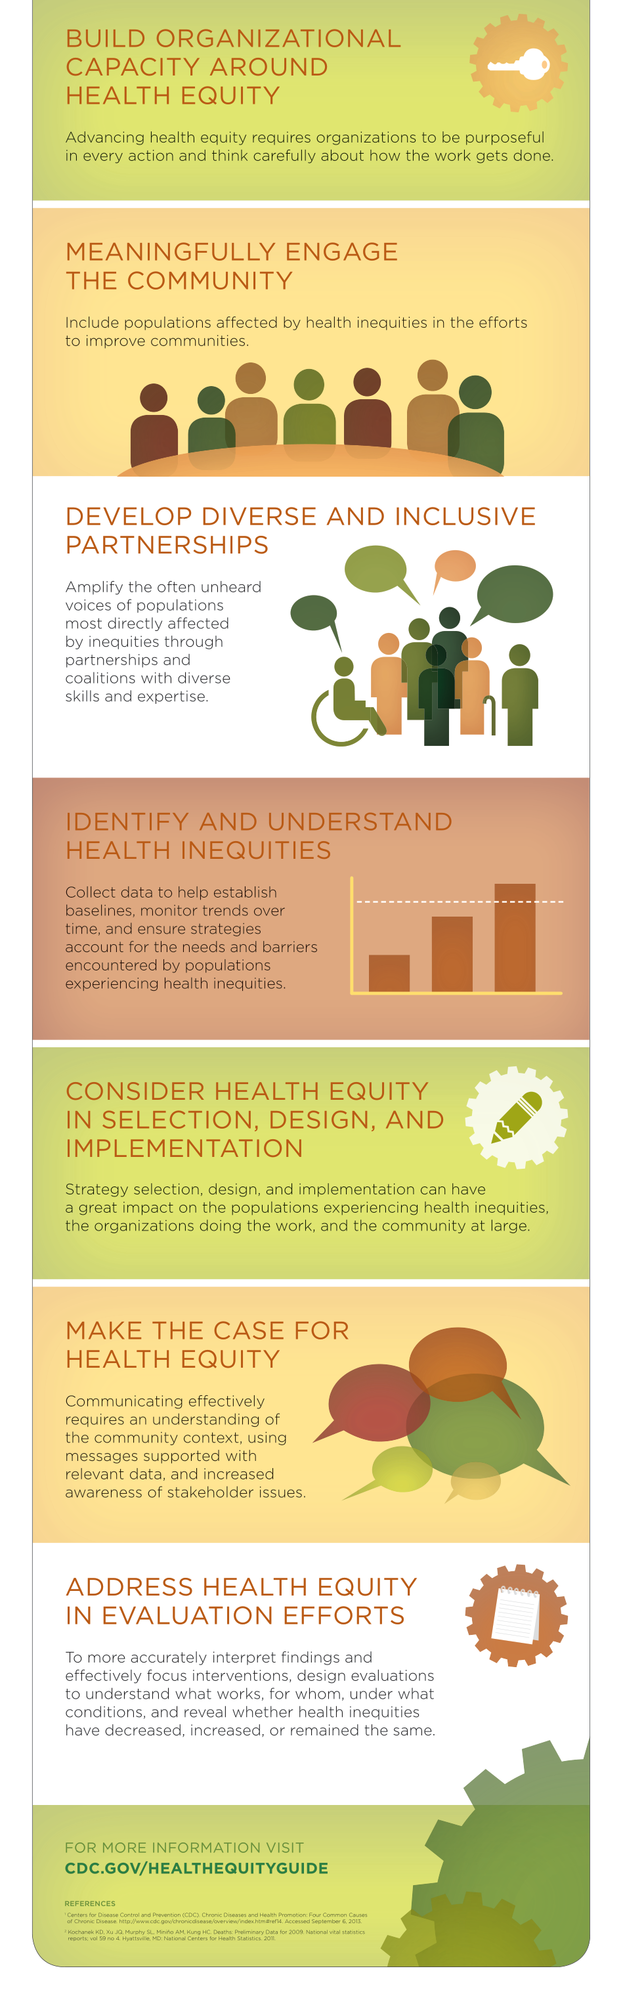 CDC Community Health Equity Infographic 2